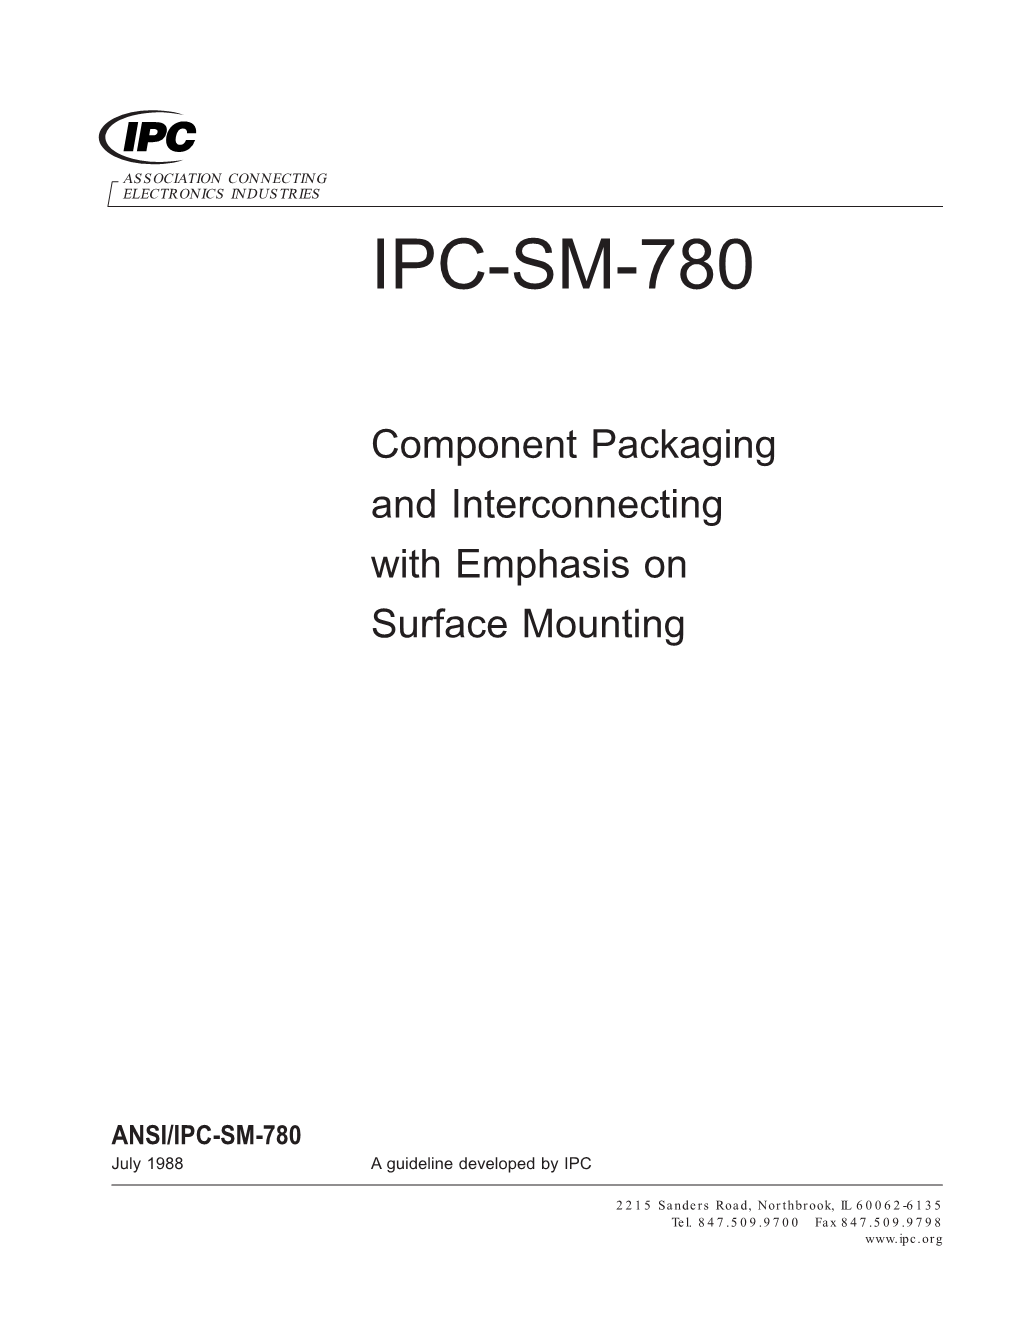 IPC-SM-780 Table of Contents